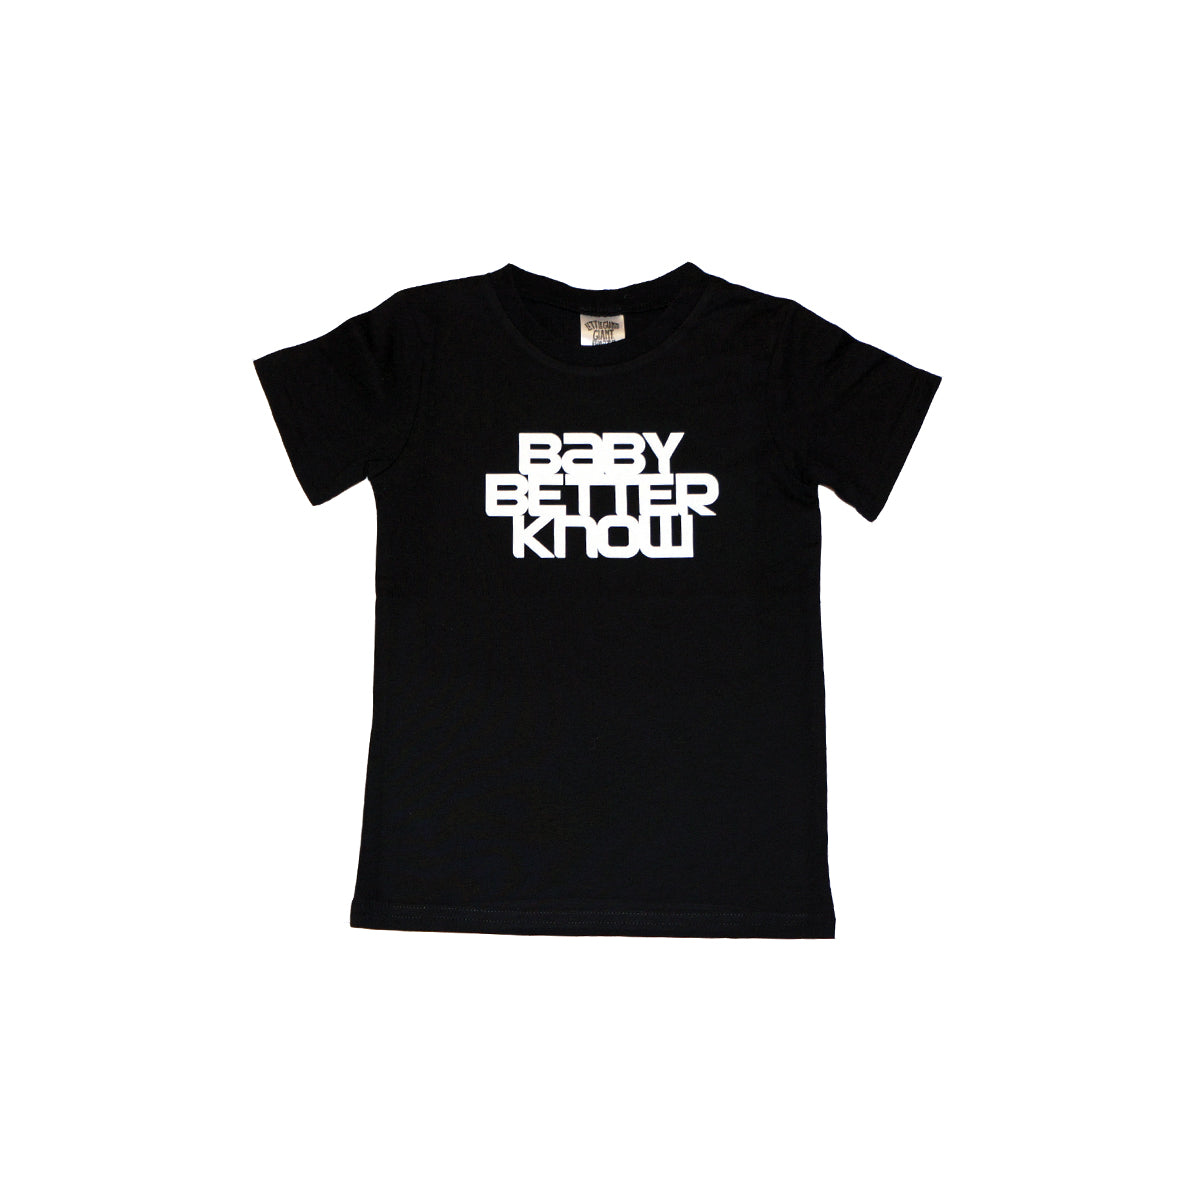 Baby Better Know T-shirt (Black)